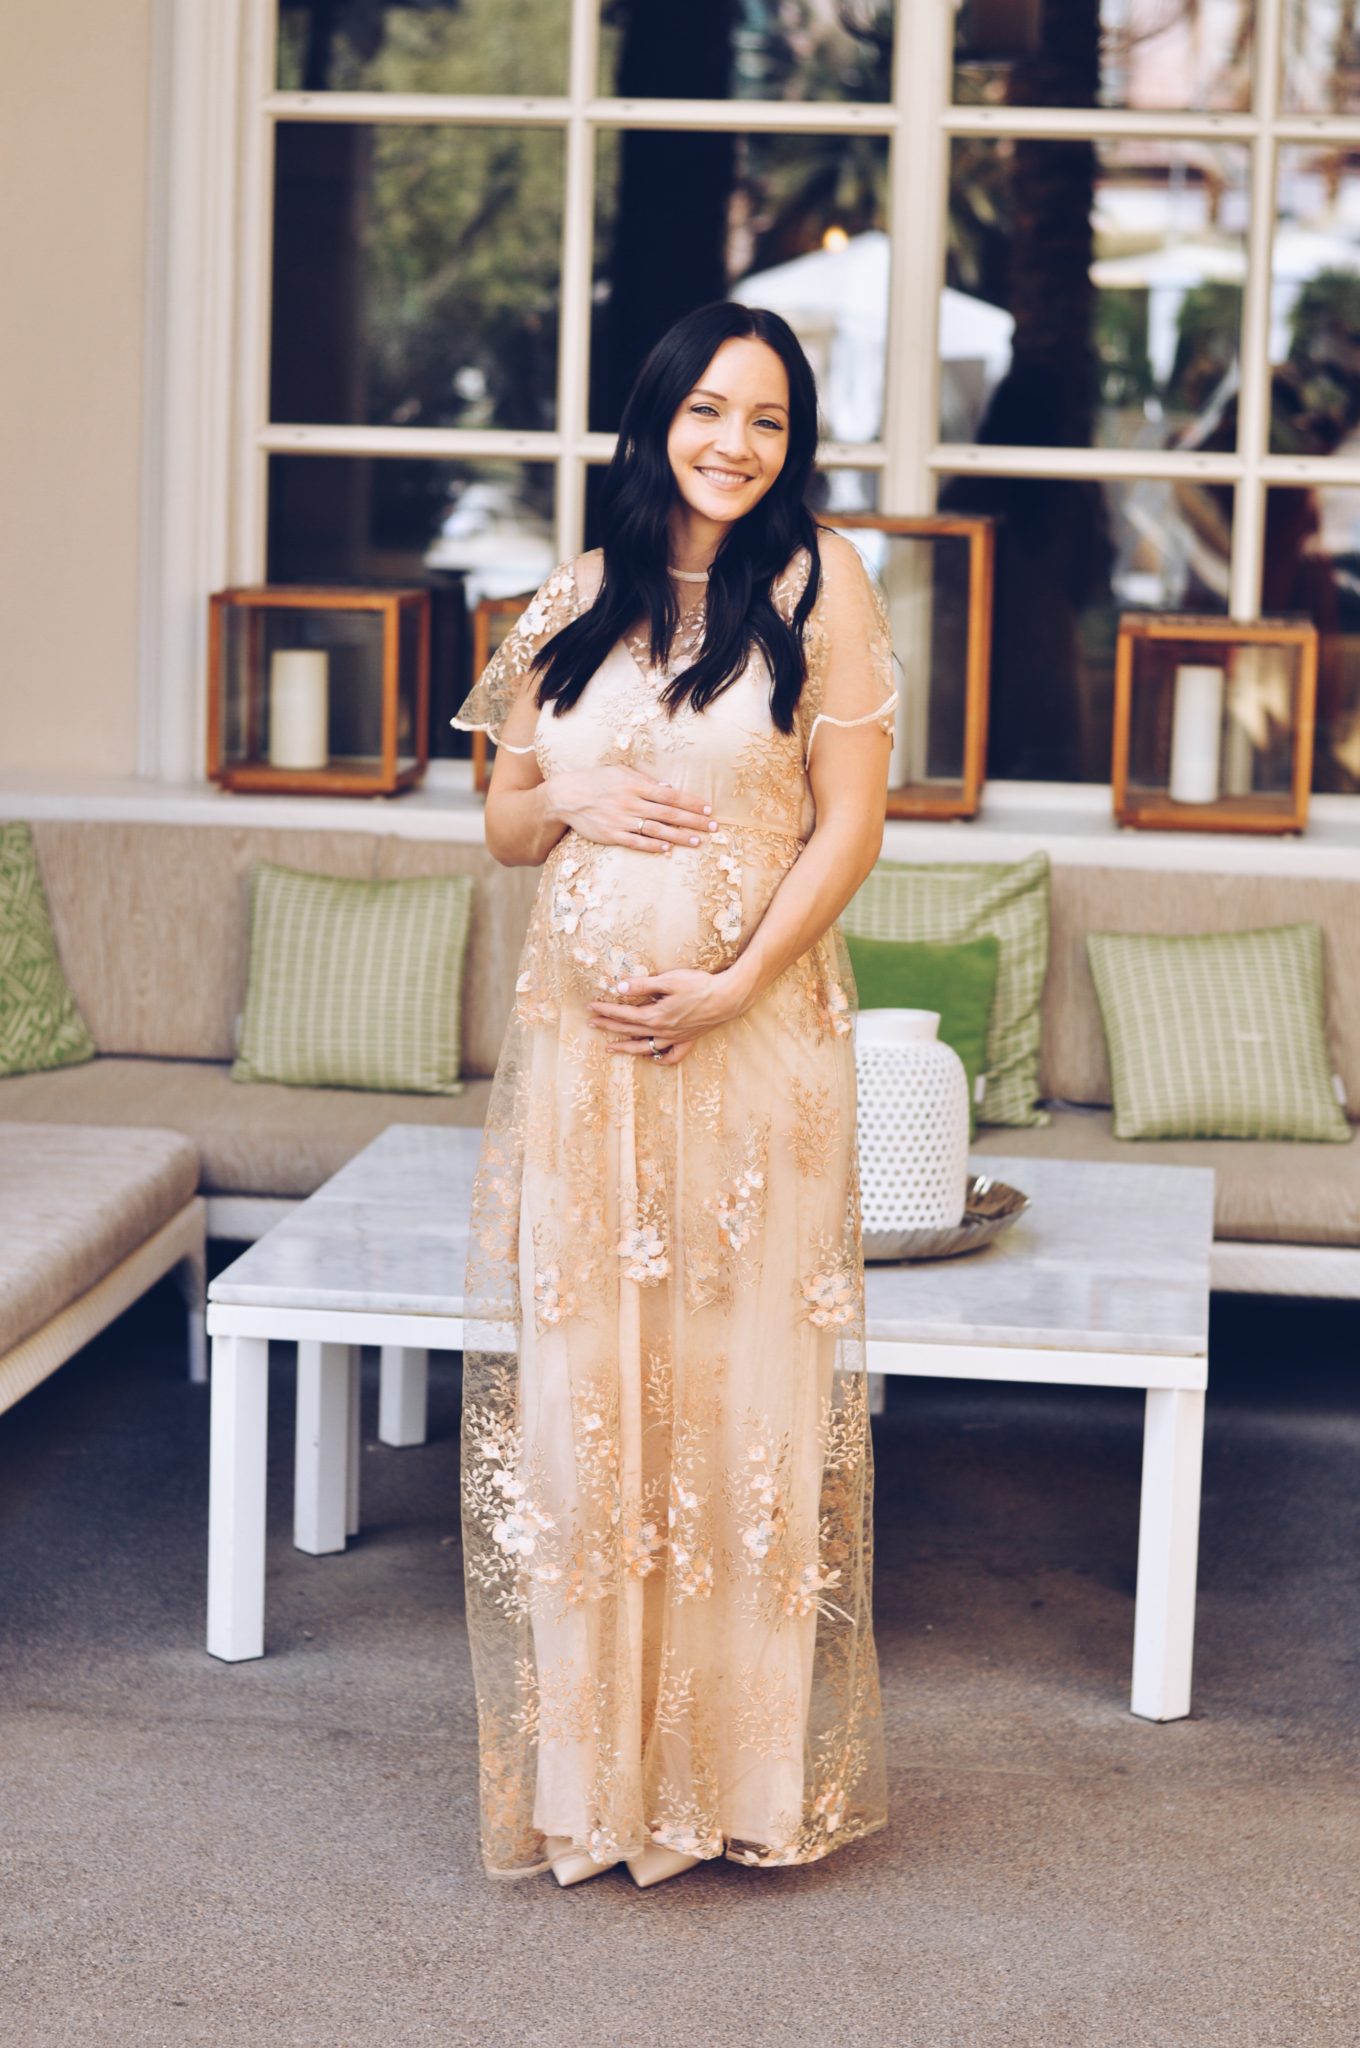 Baby Sprinkle Shower by popular Las Vegas lifestyle blogger Outfits & Outings